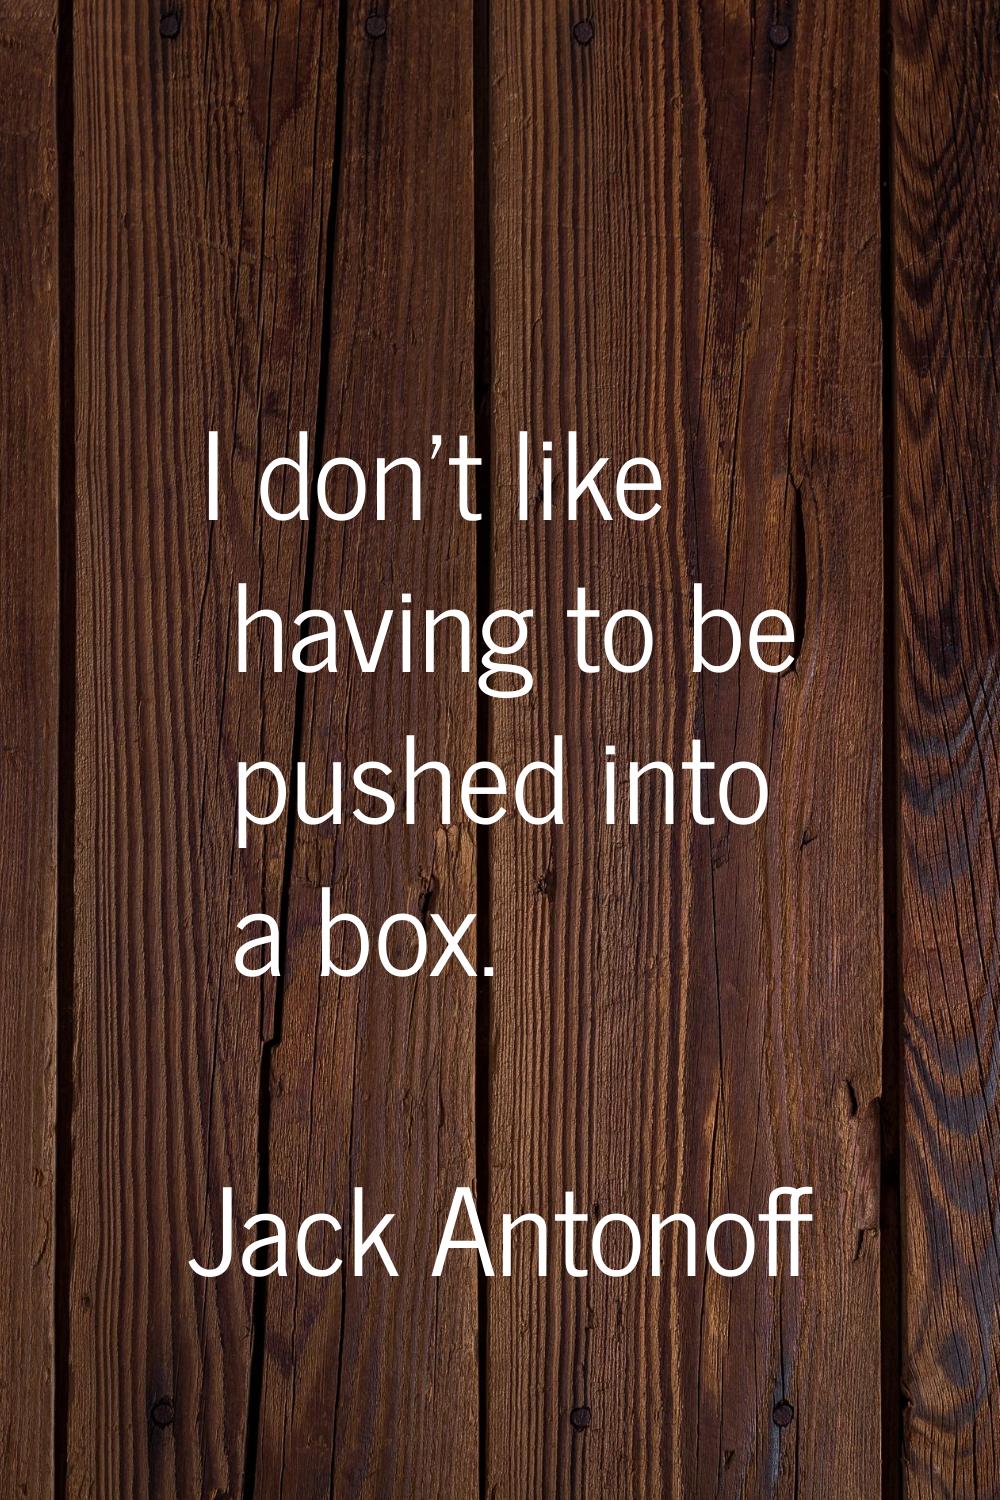 I don't like having to be pushed into a box.